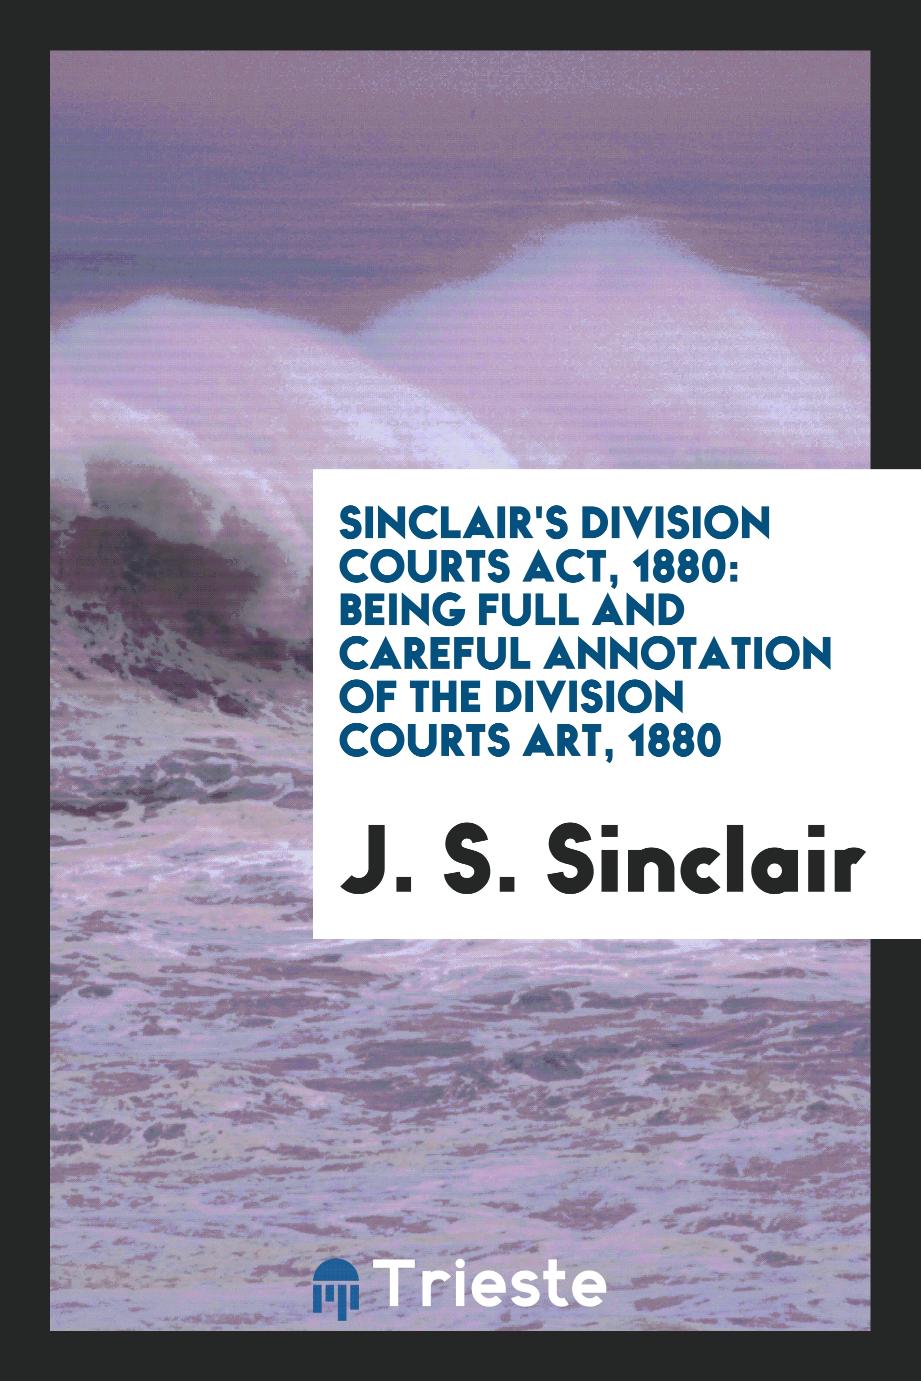 Sinclair's Division Courts Act, 1880: Being Full and Careful Annotation of the Division Courts Art, 1880